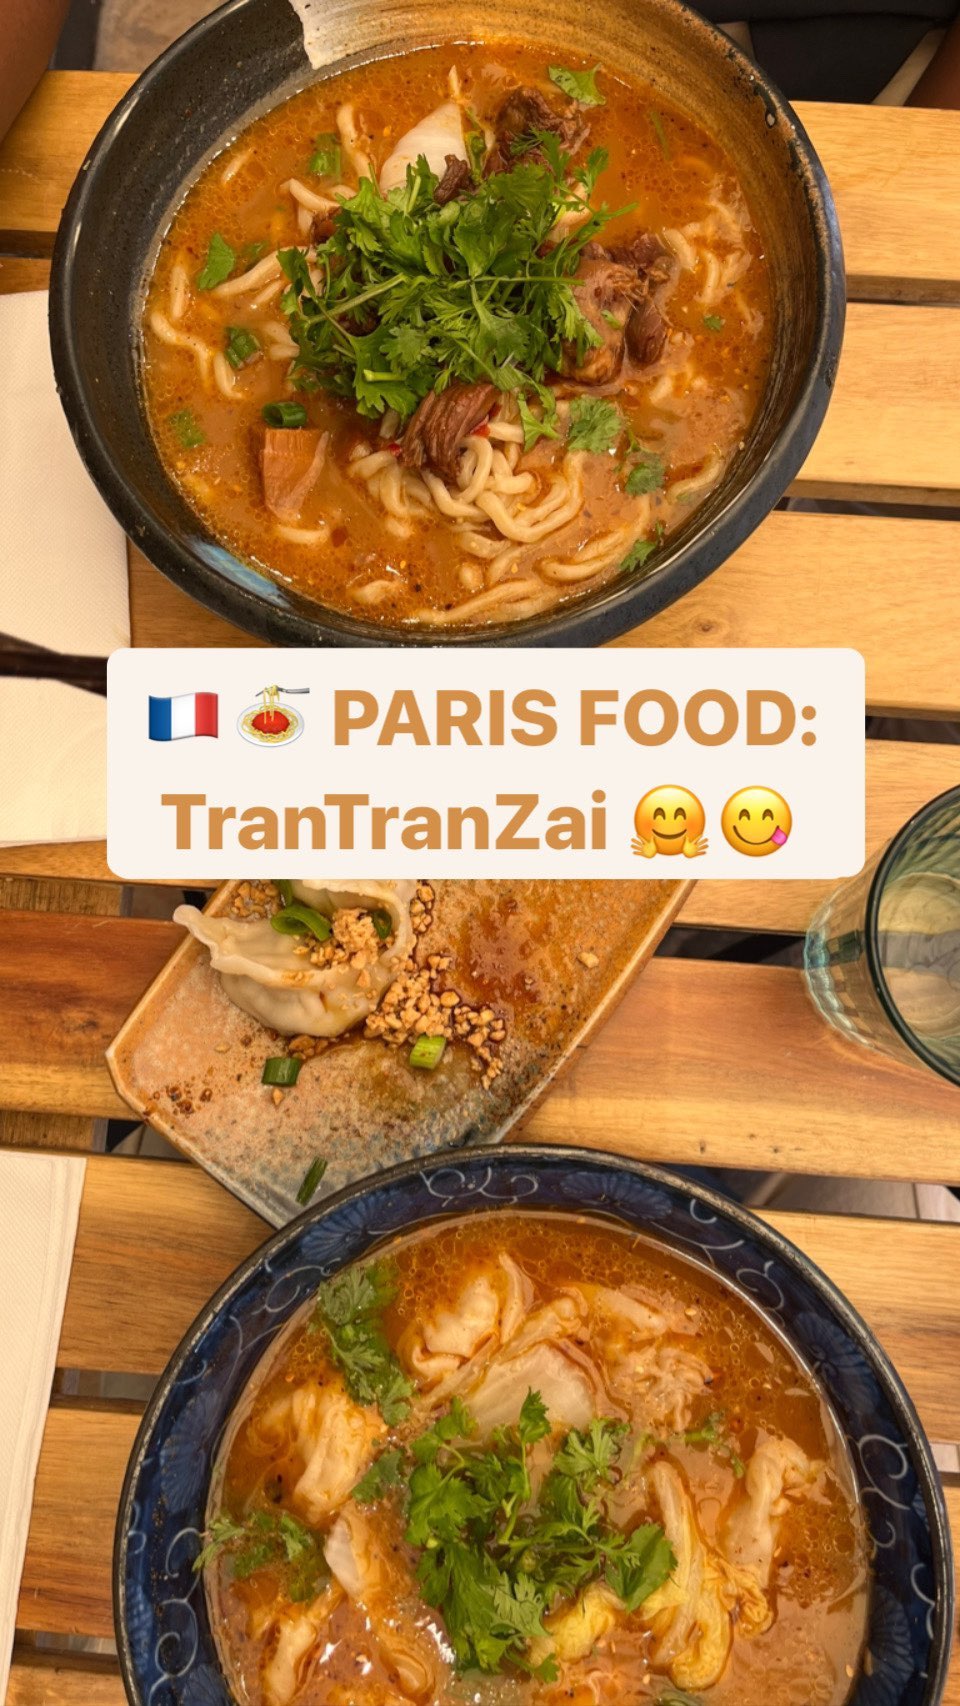 FOOD IN PARIS : the flavour points at TranTranZai is everything. I love going here with my family. 🍝🍝 Located in the 2nd arrondissement close to Châtelet/Les Halles … everything is good and they will add the level of spice you want per meal from 0 to 6 🔥🔥🔥 
/
Loving the content? Share, Like, Follow and bookmark for your next trip to Paris @myparisianlife #paris #myparisianlife #wheretoeatinparis #parisblogger #paristourguide #travelerinparis #parisjetaime #parisfood